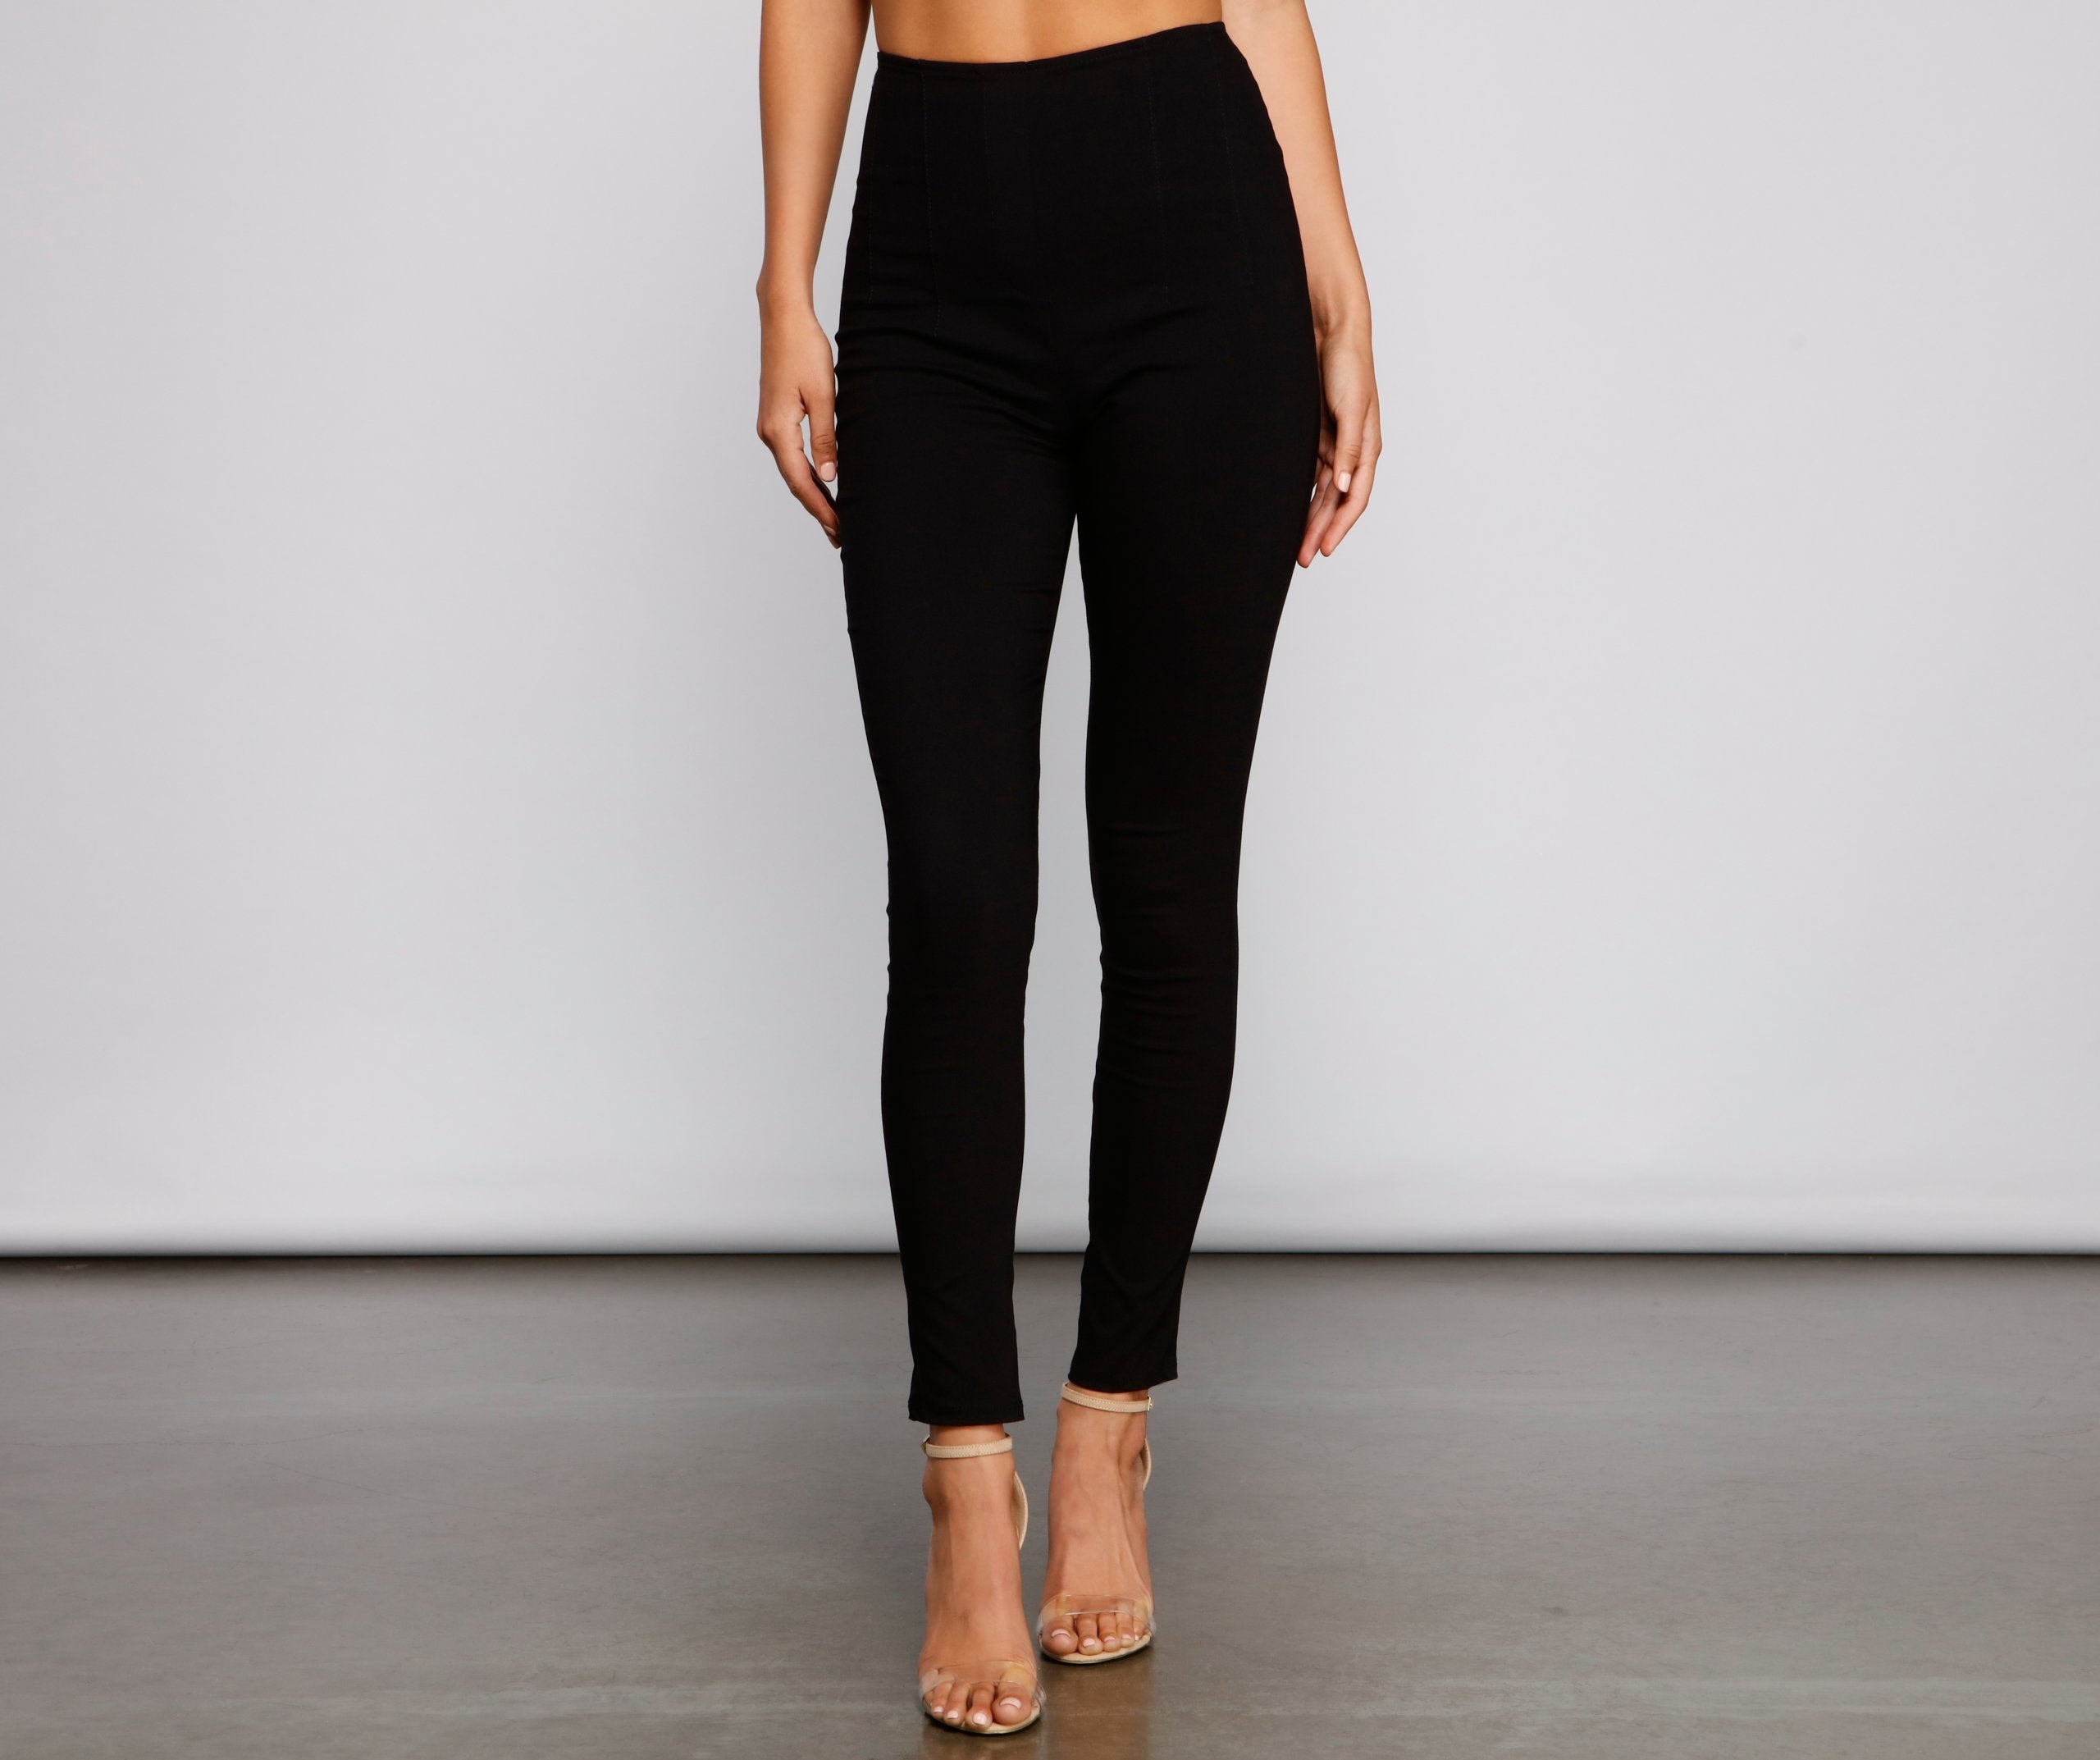 Perfectly Chic Skinny Dress Pants - Lady Occasions